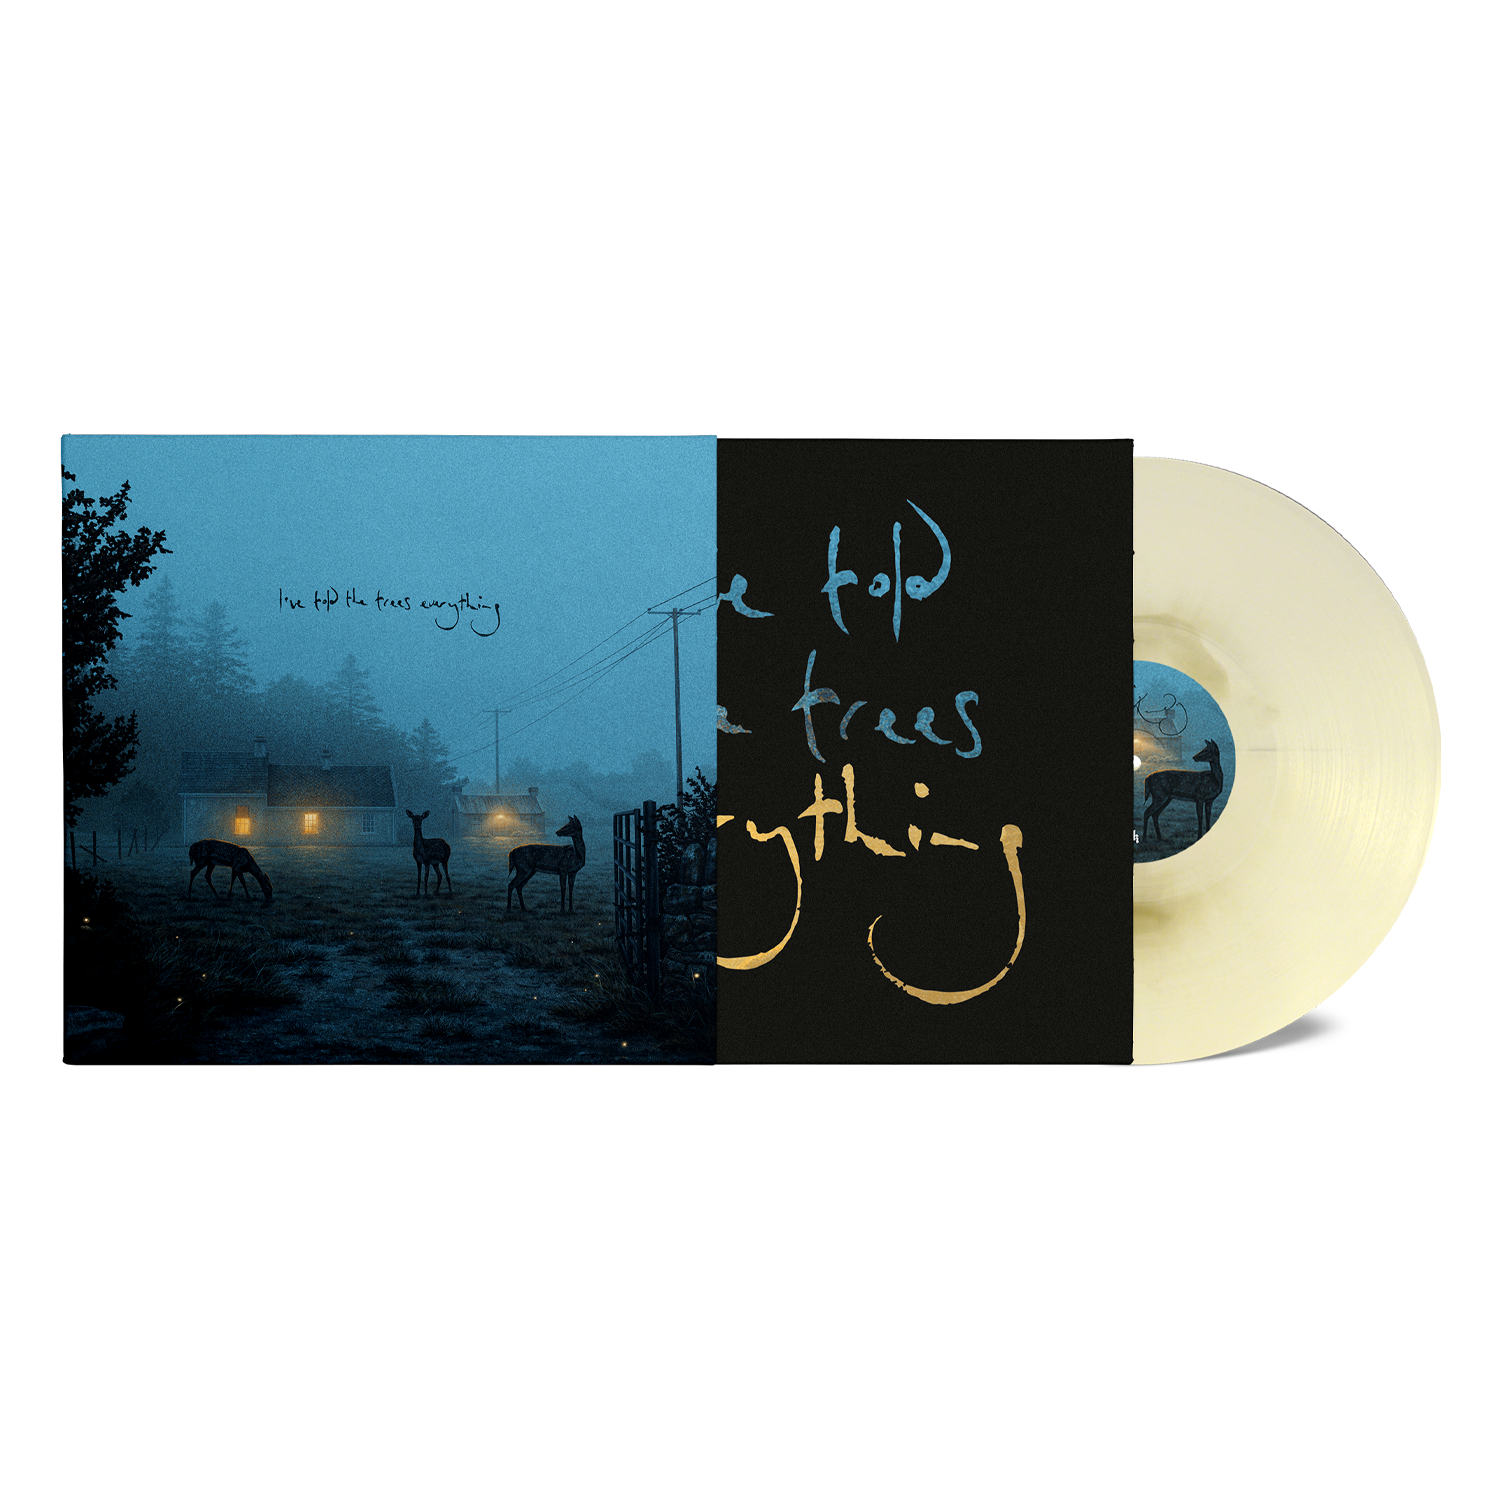 Dermot Kennedy - I've told the trees everything: Limited Edition Marble Vinyl